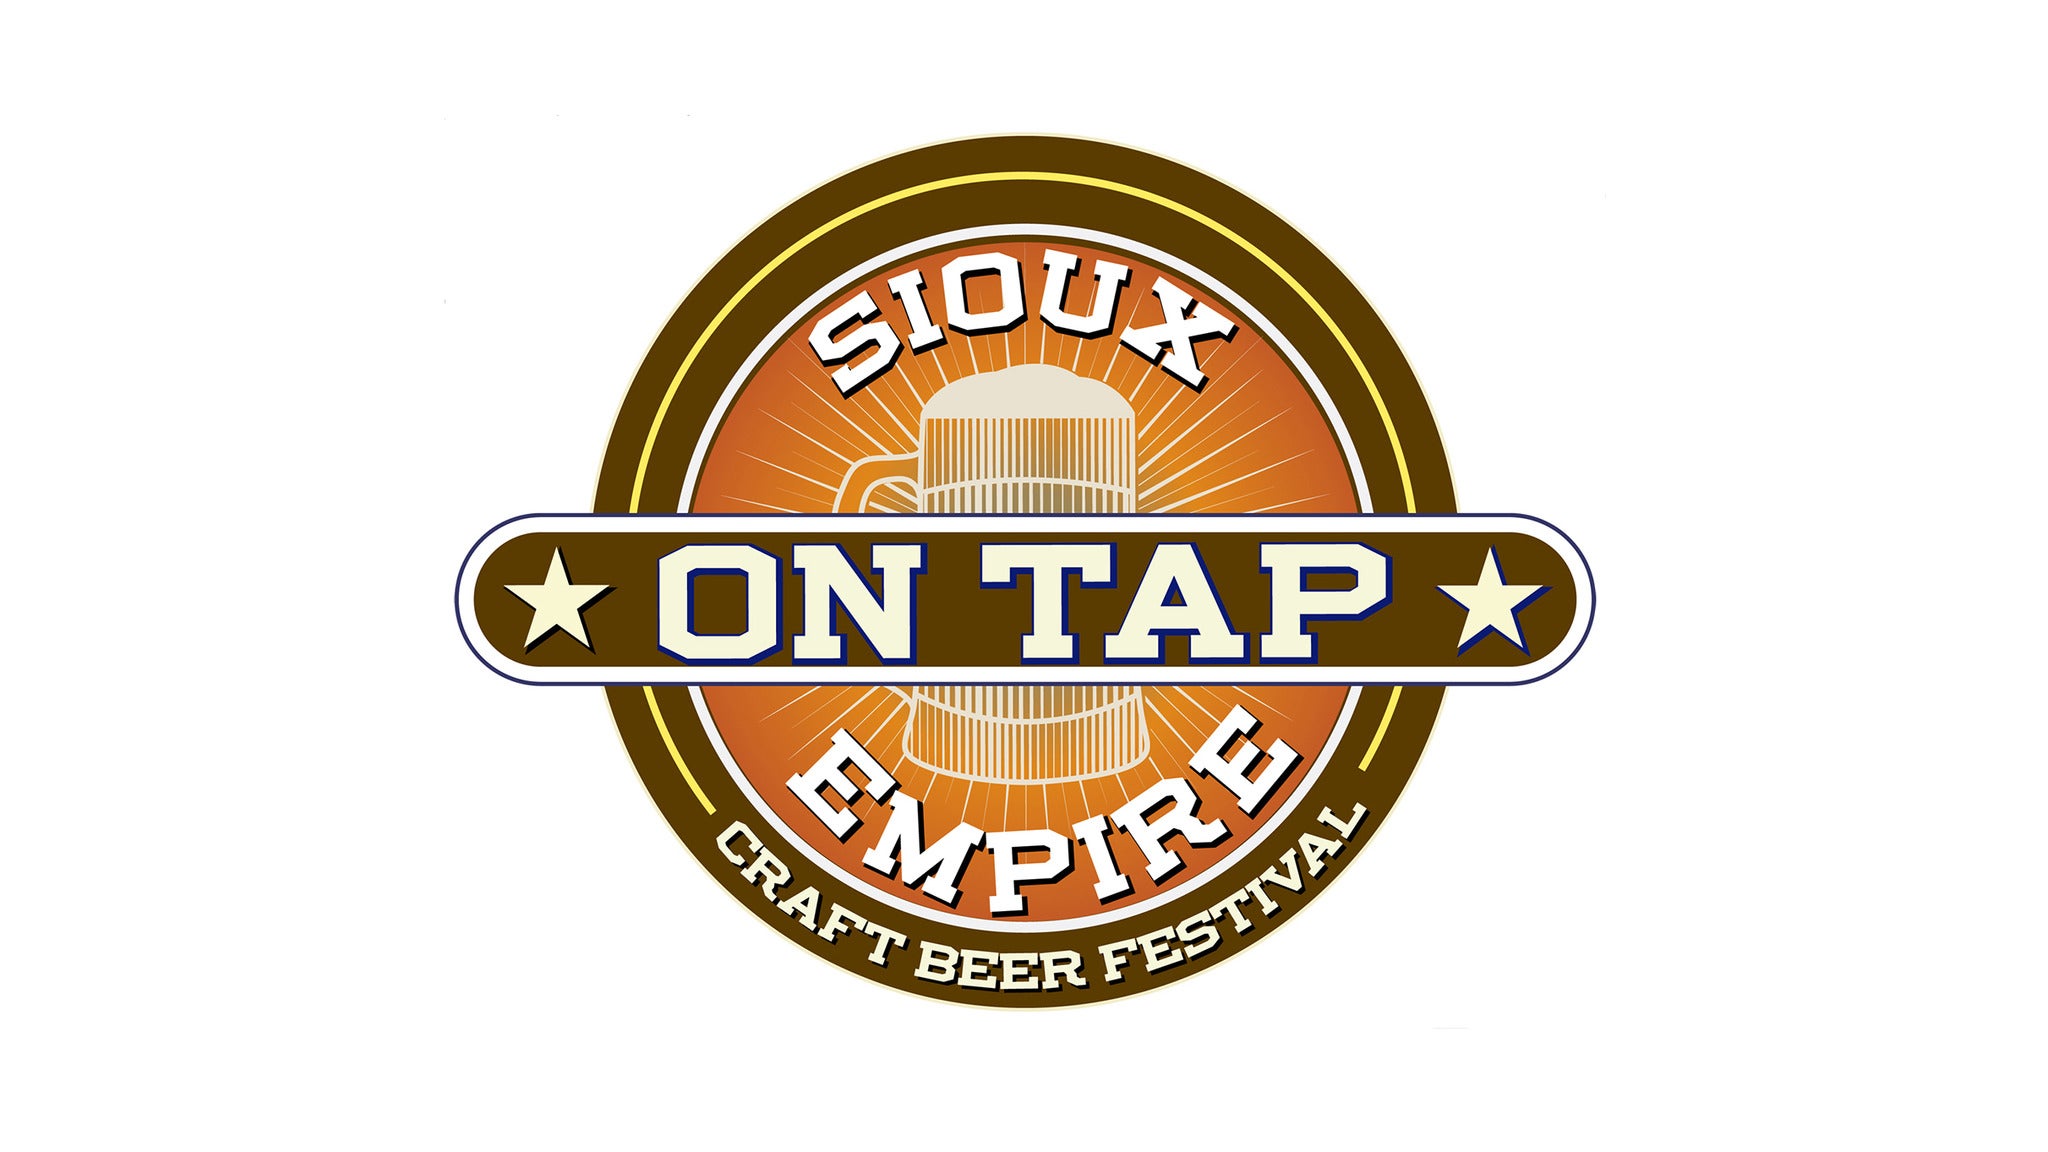 Sioux Empire On Tap 2023 - 1pm Session in Sioux Falls promo photo for Sioux Empire on Tap presale offer code